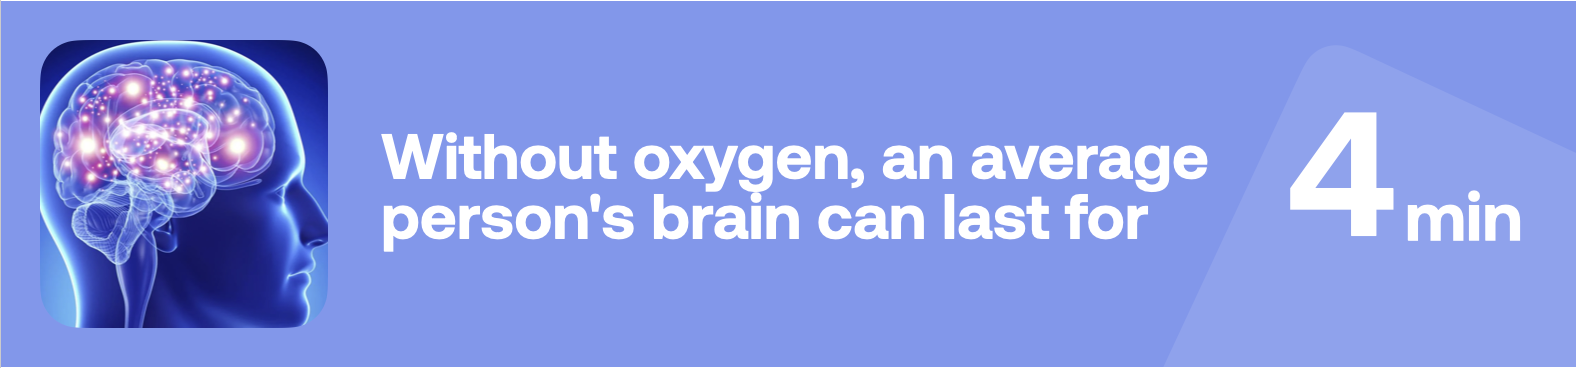 Without oxygen, an average person's brain can last for 4 min